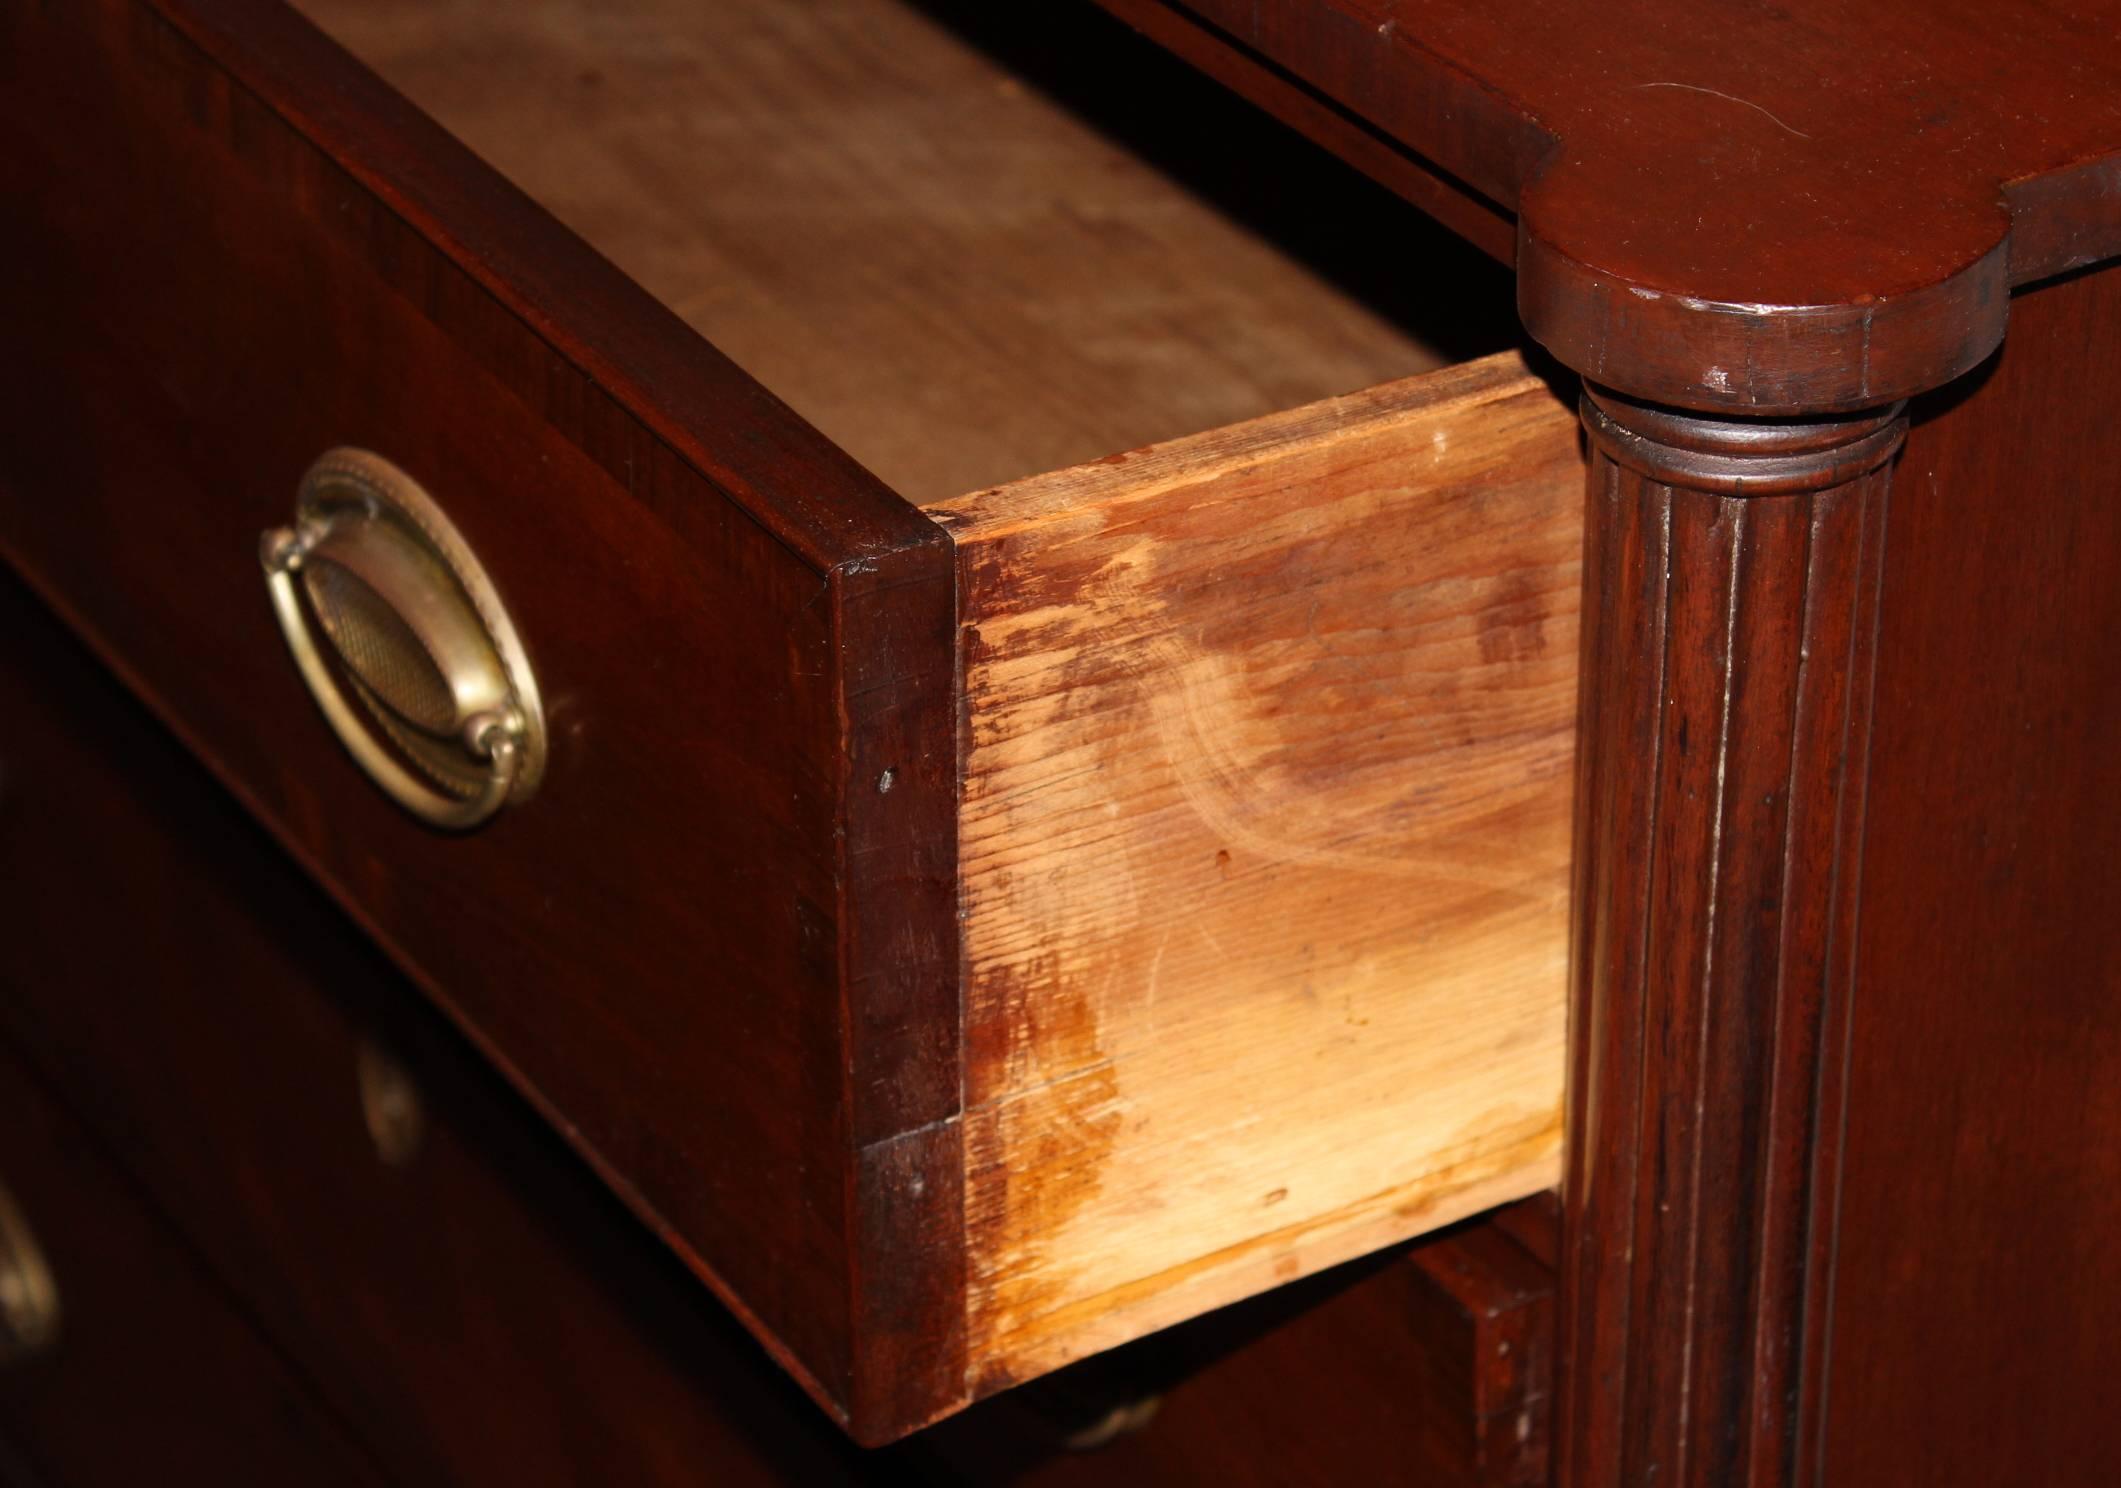 Carved American Sheraton Mahogany Four-Drawer Chest with Ovolu Corners, circa 1820